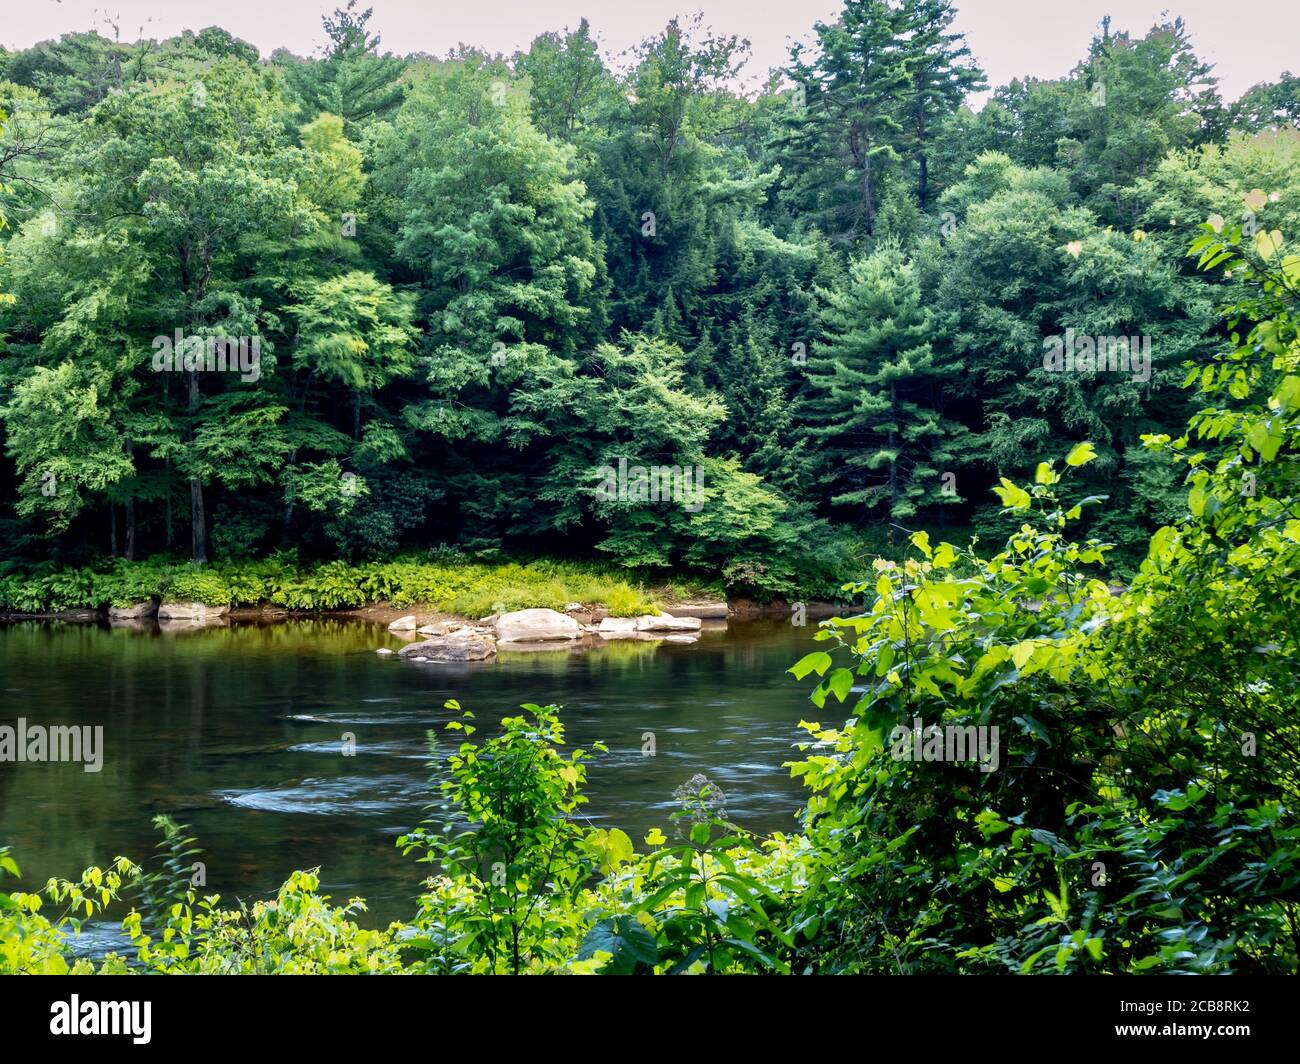 Clarion river in Cook Forest State Park in Pennsylvania near the Allegheny National Forest.  Lots of green trees along the river! Stock Photo